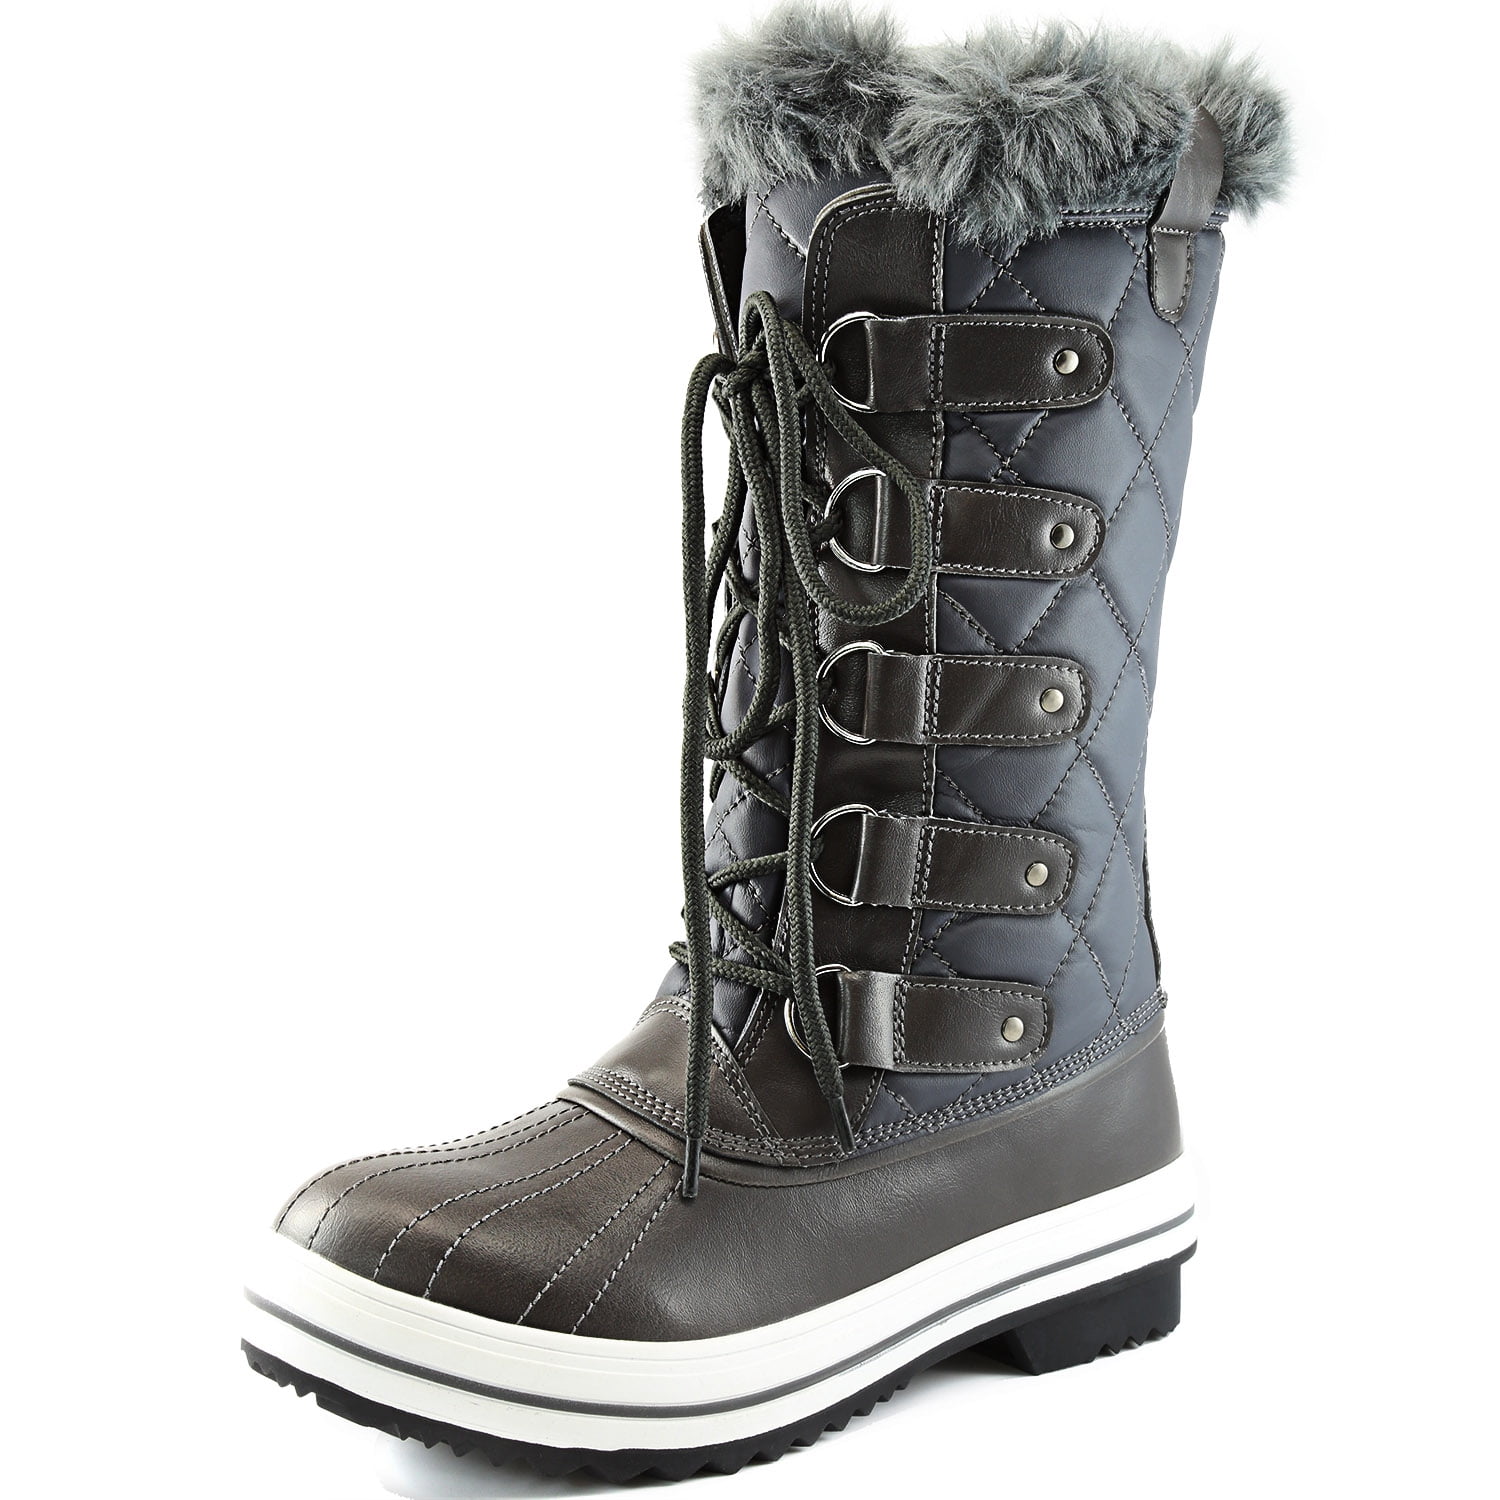 DailyShoes - Women's Lace Up Knee High Artic Warm Fur Water Resistant ...